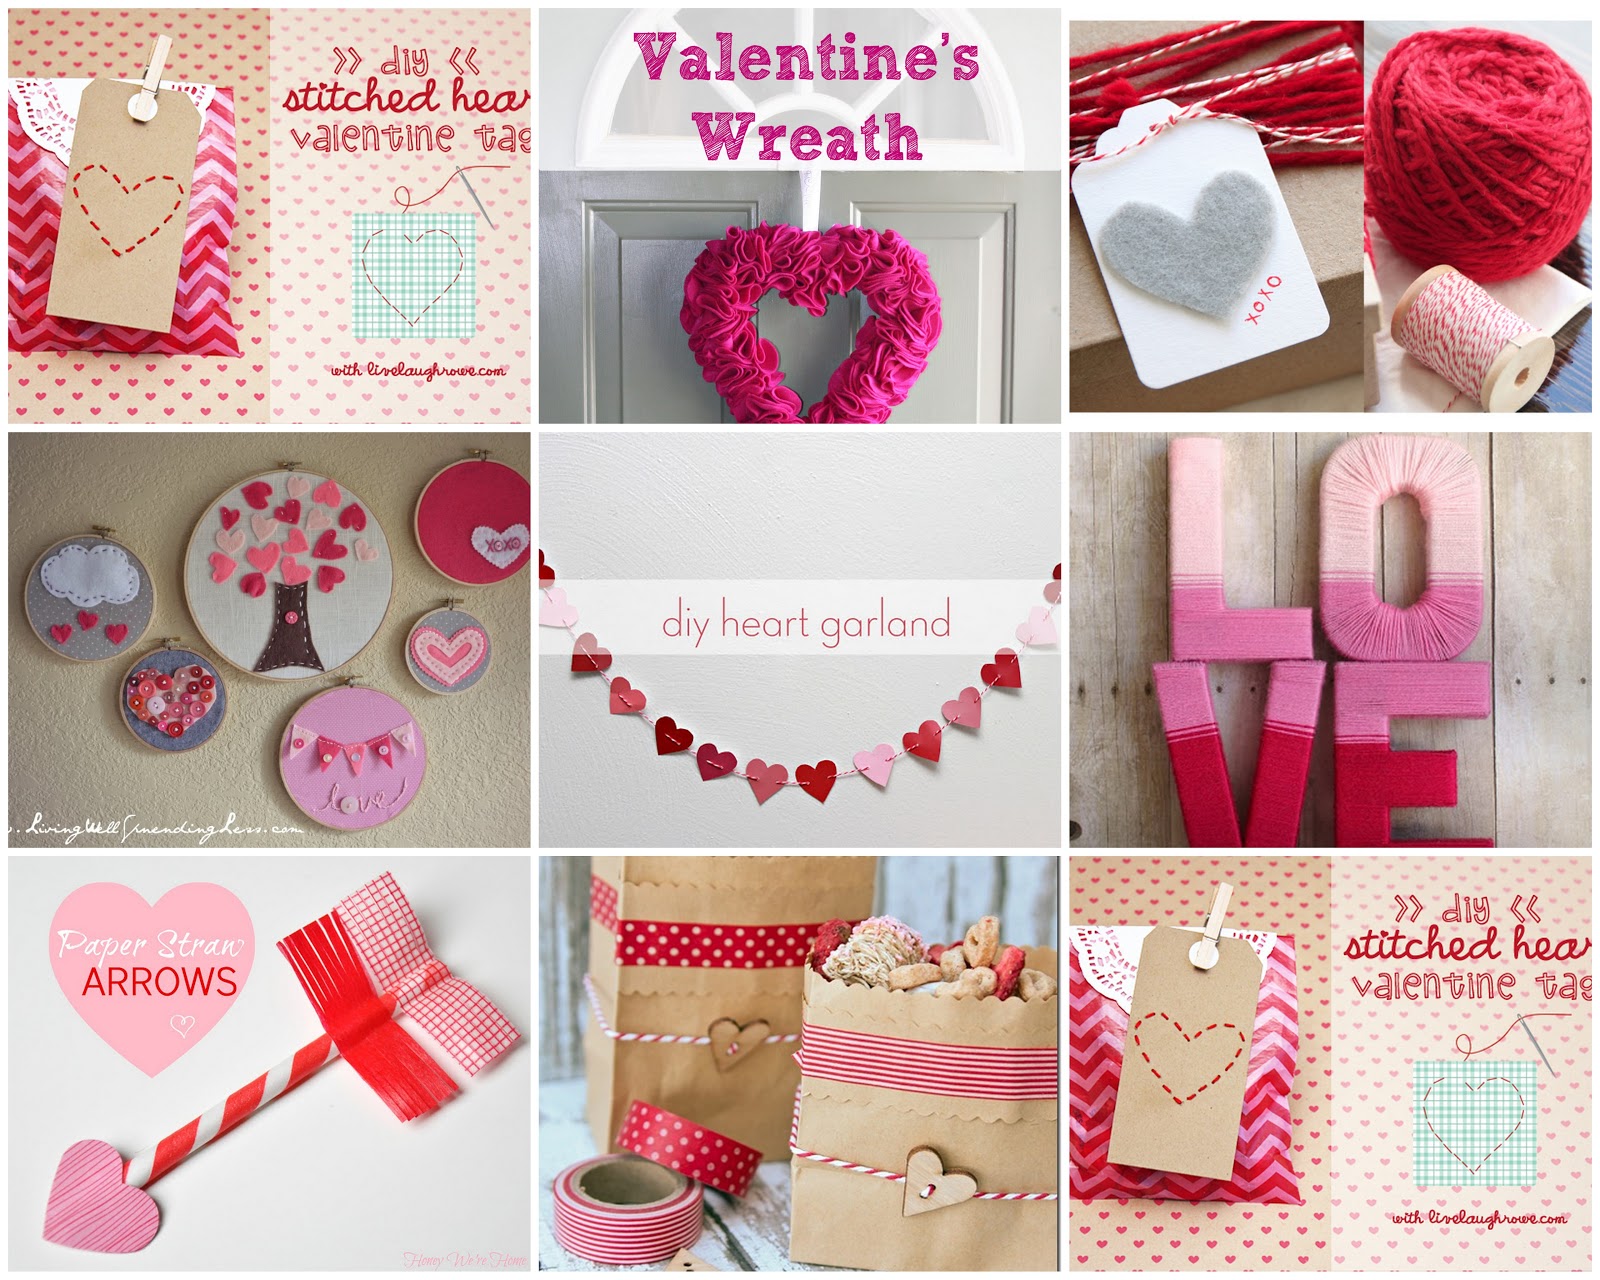 Lovely Little Life: Things I'm Loving Thursday : DIY Valentine's Day Projects1600 x 1280